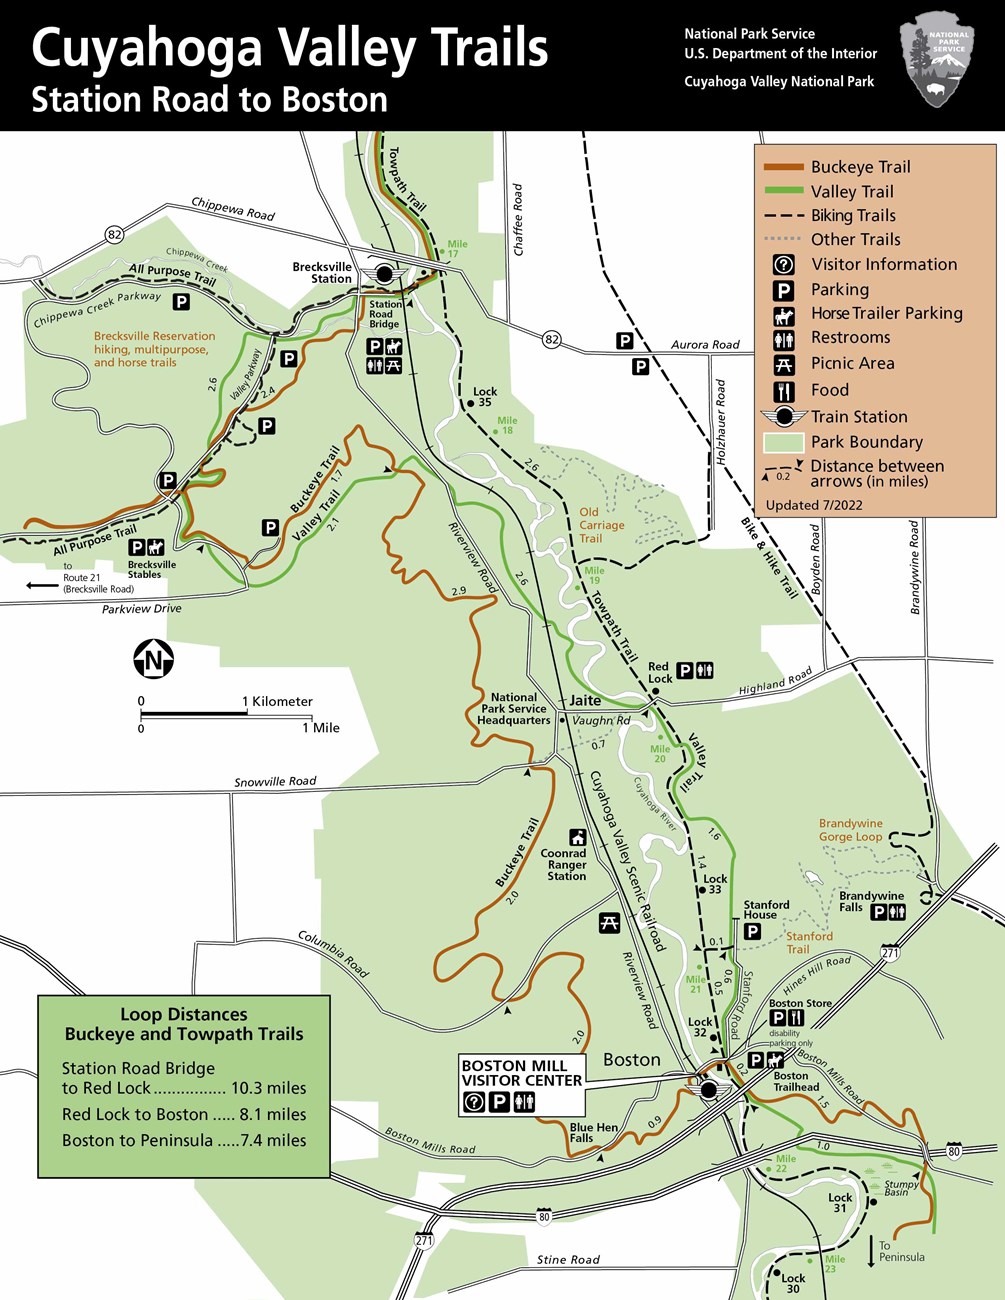 The major trails, roads, and locations from Station Road Bridge to Boston Mill Visitor Center with their amenities. Riverview Road runs through the middle of the park with Station Road Bridge, Jaite, and Boston located off Riverview Rd.